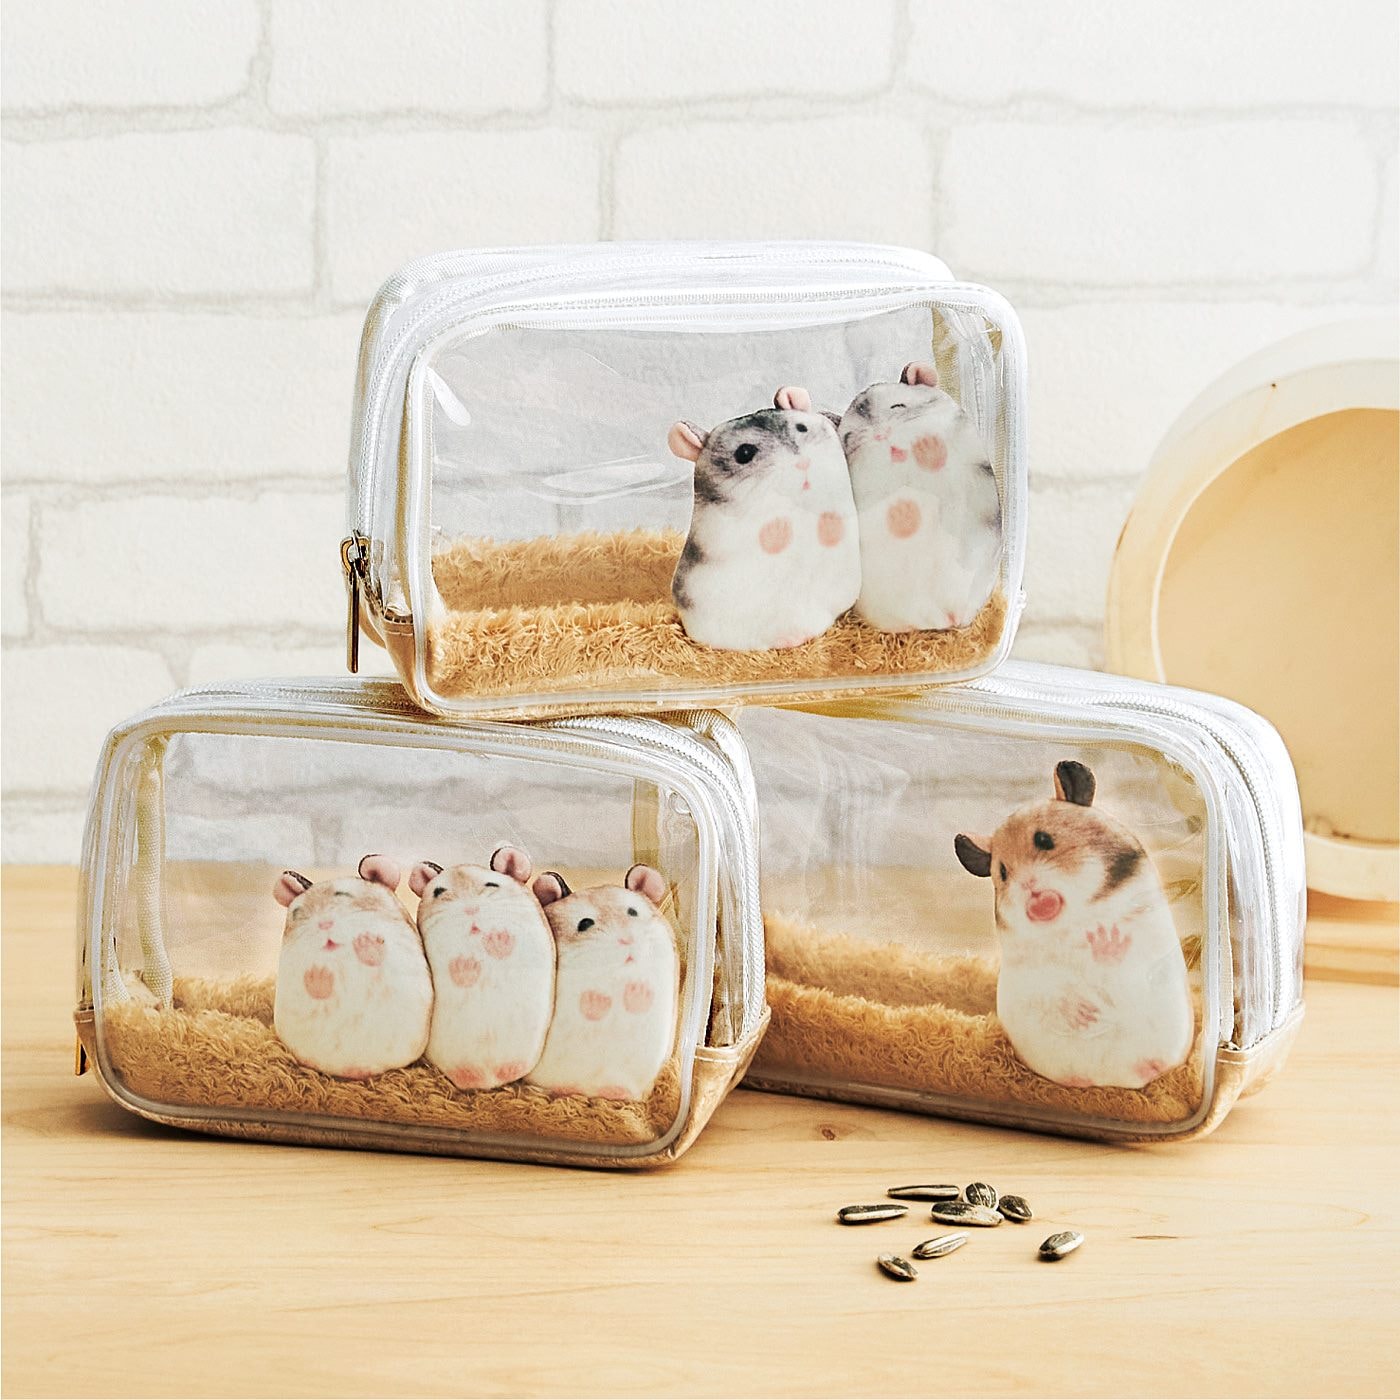 Felissimo hamster pouch - 3 designs